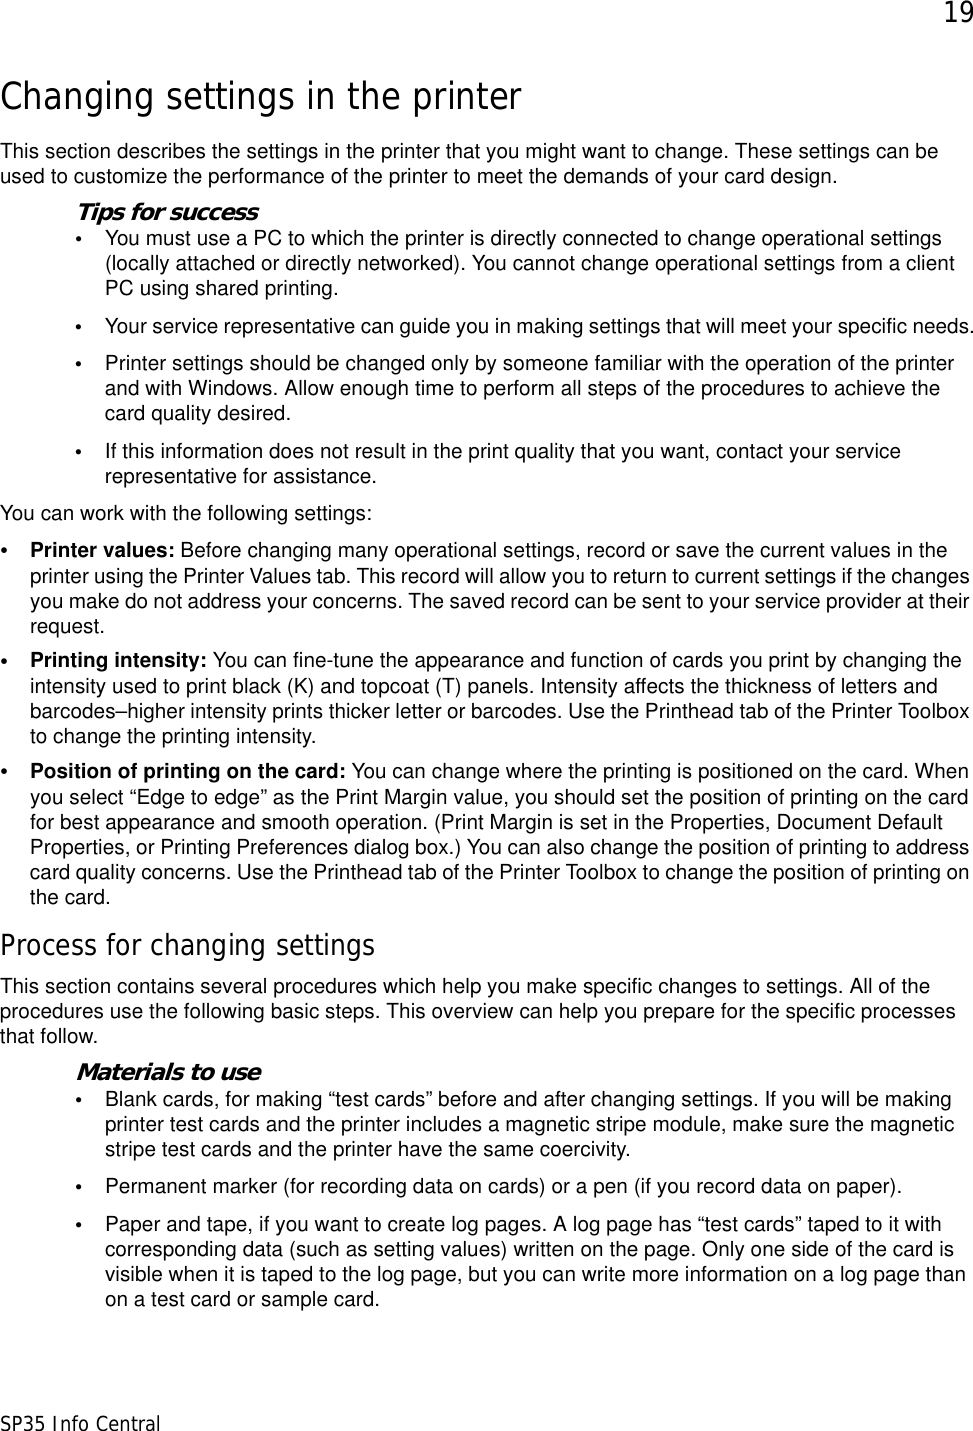 19SP35 Info CentralChanging settings in the printerThis section describes the settings in the printer that you might want to change. These settings can be used to customize the performance of the printer to meet the demands of your card design. Tips for success•You must use a PC to which the printer is directly connected to change operational settings (locally attached or directly networked). You cannot change operational settings from a client PC using shared printing.•Your service representative can guide you in making settings that will meet your specific needs.•Printer settings should be changed only by someone familiar with the operation of the printer and with Windows. Allow enough time to perform all steps of the procedures to achieve the card quality desired.•If this information does not result in the print quality that you want, contact your service representative for assistance.You can work with the following settings:•Printer values: Before changing many operational settings, record or save the current values in the printer using the Printer Values tab. This record will allow you to return to current settings if the changes you make do not address your concerns. The saved record can be sent to your service provider at their request.   •Printing intensity: You can fine-tune the appearance and function of cards you print by changing the intensity used to print black (K) and topcoat (T) panels. Intensity affects the thickness of letters and barcodes–higher intensity prints thicker letter or barcodes. Use the Printhead tab of the Printer Toolbox to change the printing intensity. •Position of printing on the card: You can change where the printing is positioned on the card. When you select “Edge to edge” as the Print Margin value, you should set the position of printing on the card for best appearance and smooth operation. (Print Margin is set in the Properties, Document Default Properties, or Printing Preferences dialog box.) You can also change the position of printing to address card quality concerns. Use the Printhead tab of the Printer Toolbox to change the position of printing on the card.Process for changing settingsThis section contains several procedures which help you make specific changes to settings. All of the procedures use the following basic steps. This overview can help you prepare for the specific processes that follow.Materials to use•Blank cards, for making “test cards” before and after changing settings. If you will be making printer test cards and the printer includes a magnetic stripe module, make sure the magnetic stripe test cards and the printer have the same coercivity.•Permanent marker (for recording data on cards) or a pen (if you record data on paper).•Paper and tape, if you want to create log pages. A log page has “test cards” taped to it with corresponding data (such as setting values) written on the page. Only one side of the card is visible when it is taped to the log page, but you can write more information on a log page than on a test card or sample card.